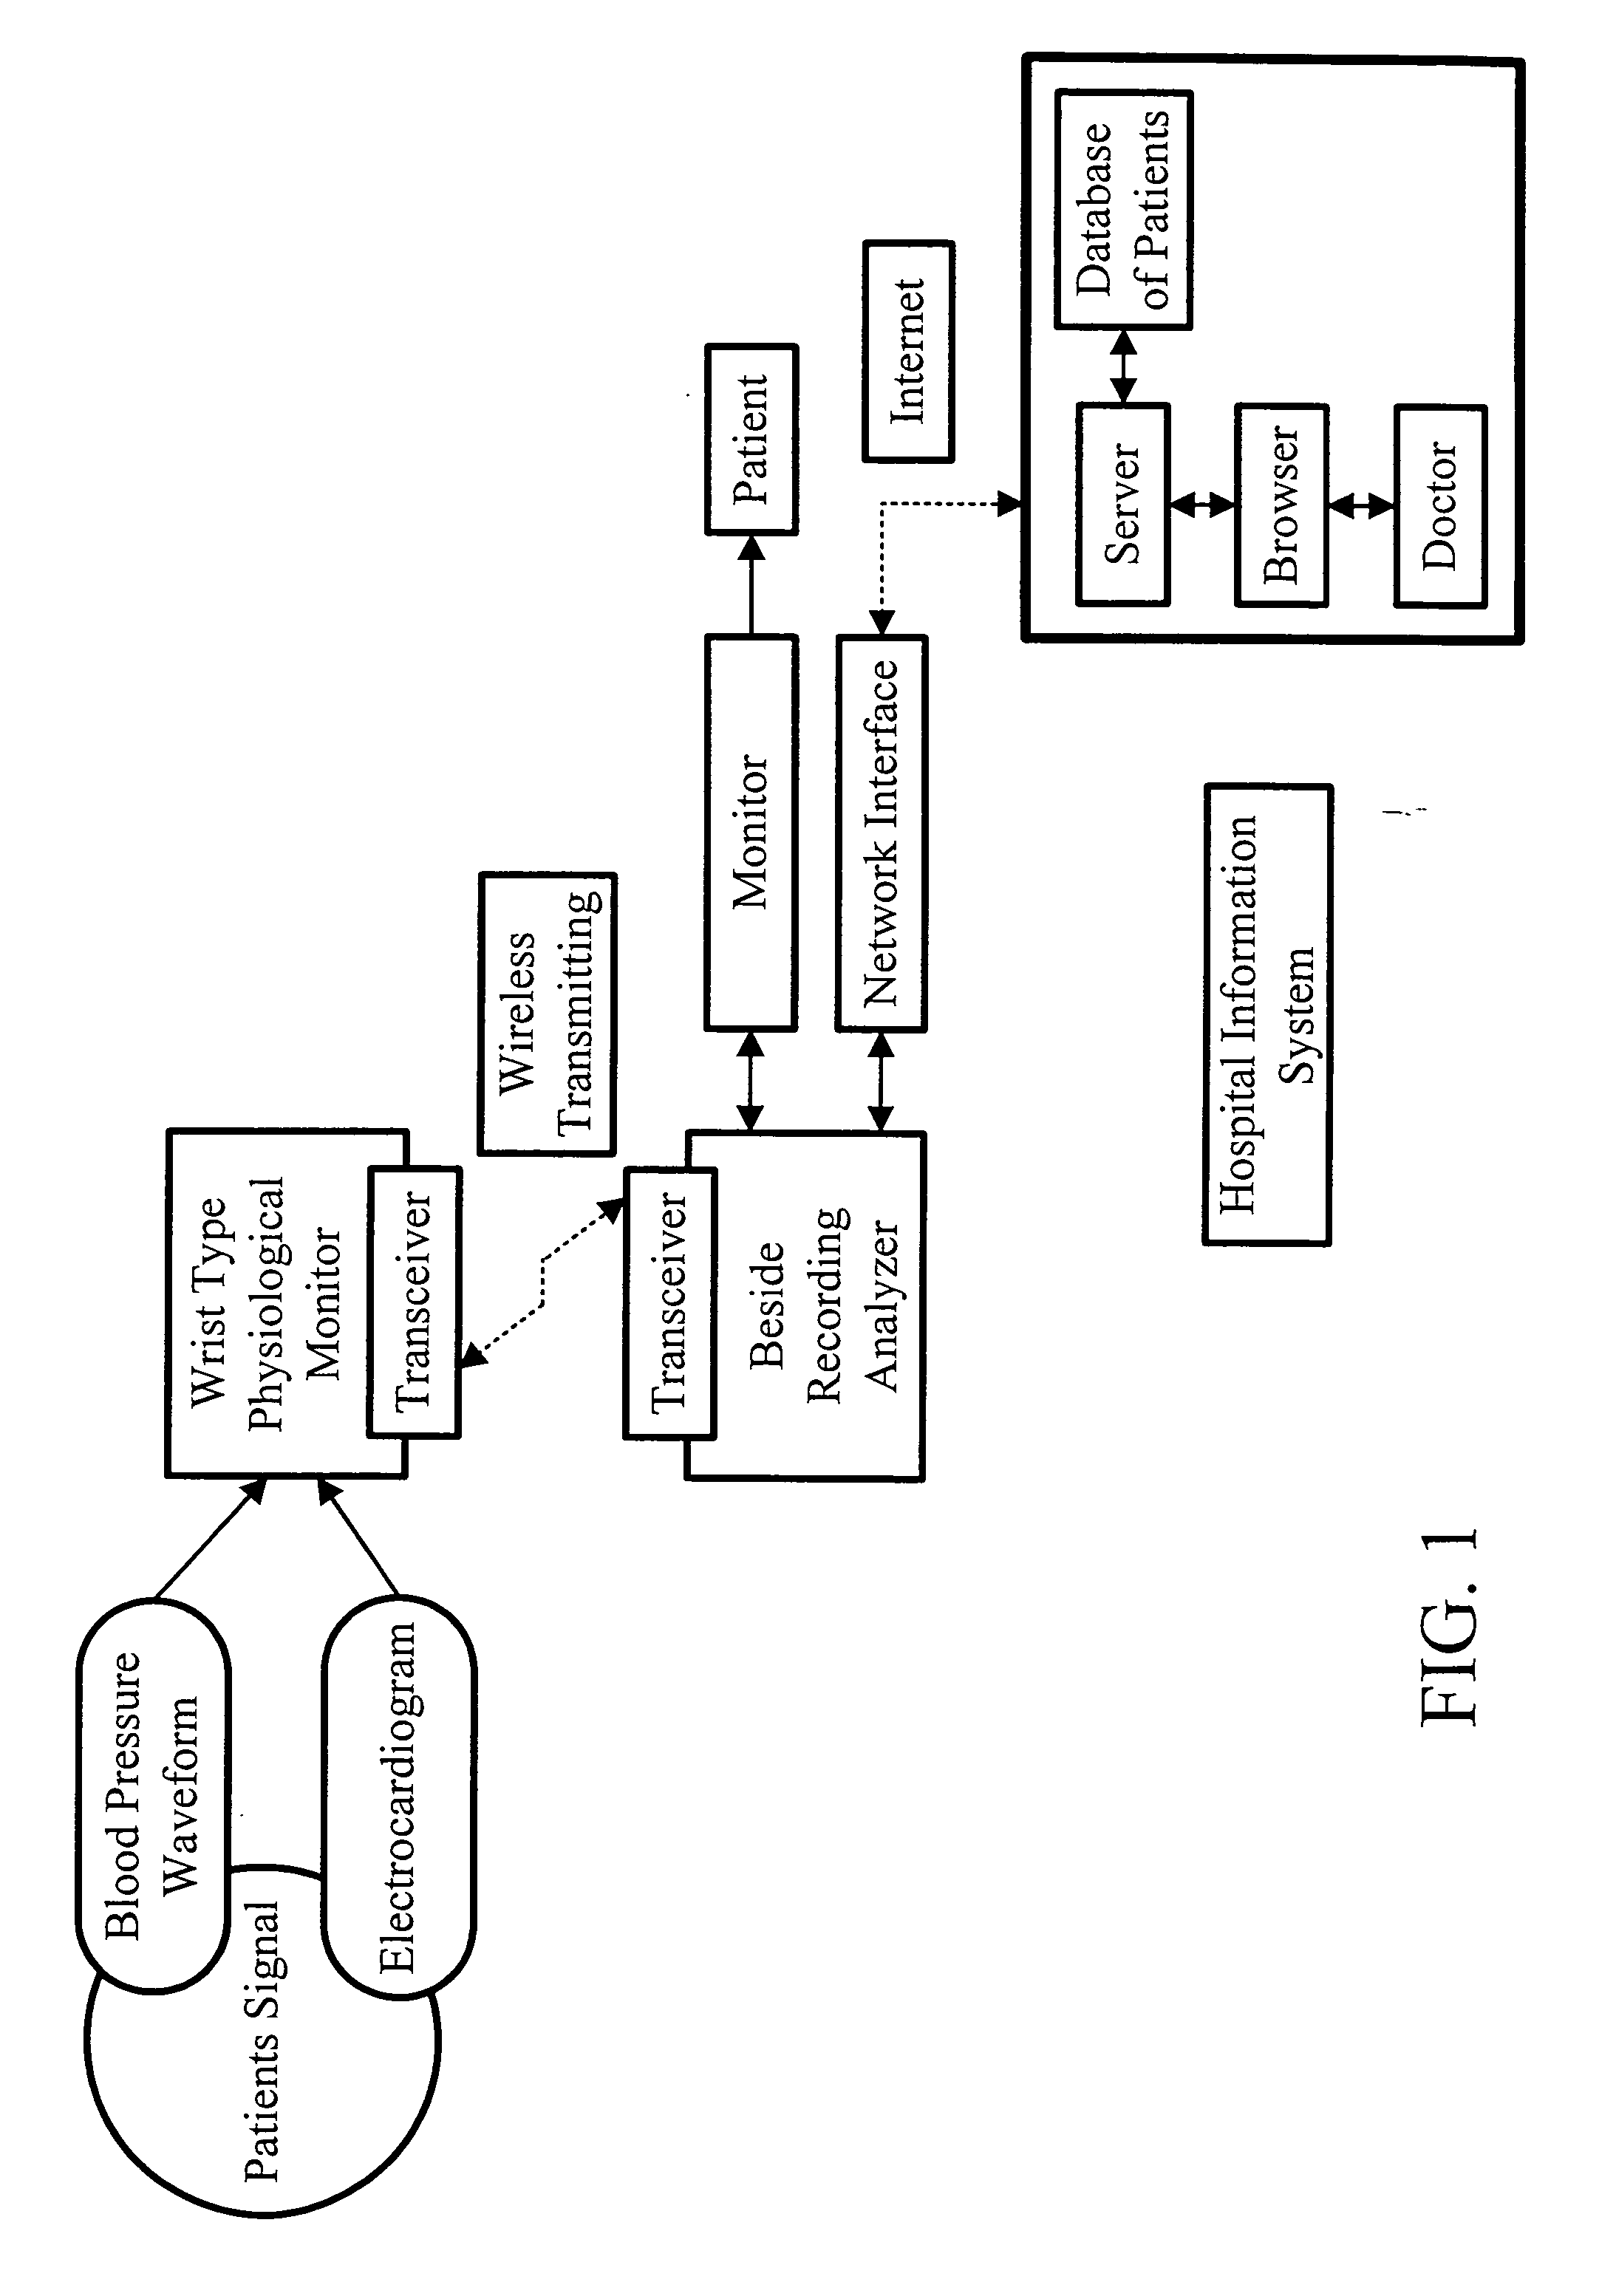 Non-invasive apparatus system for monitoring drug hepatoxicity and uses thereof